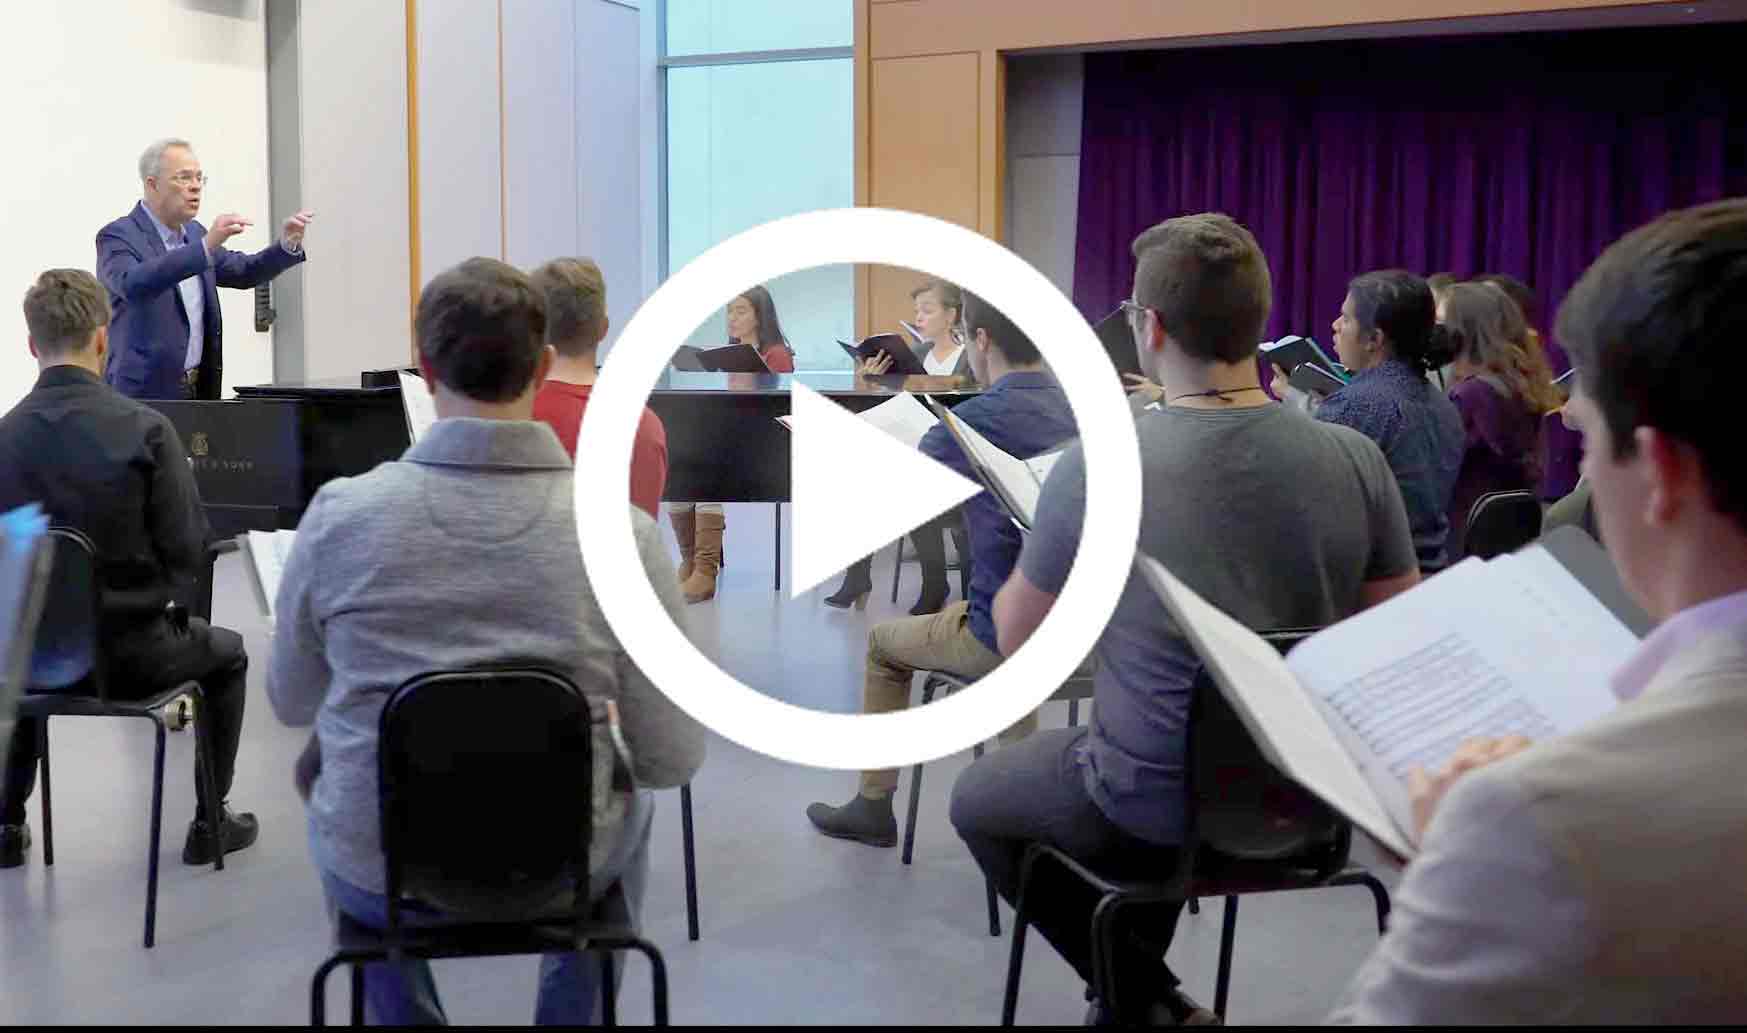 Learn about the Wells School of Music